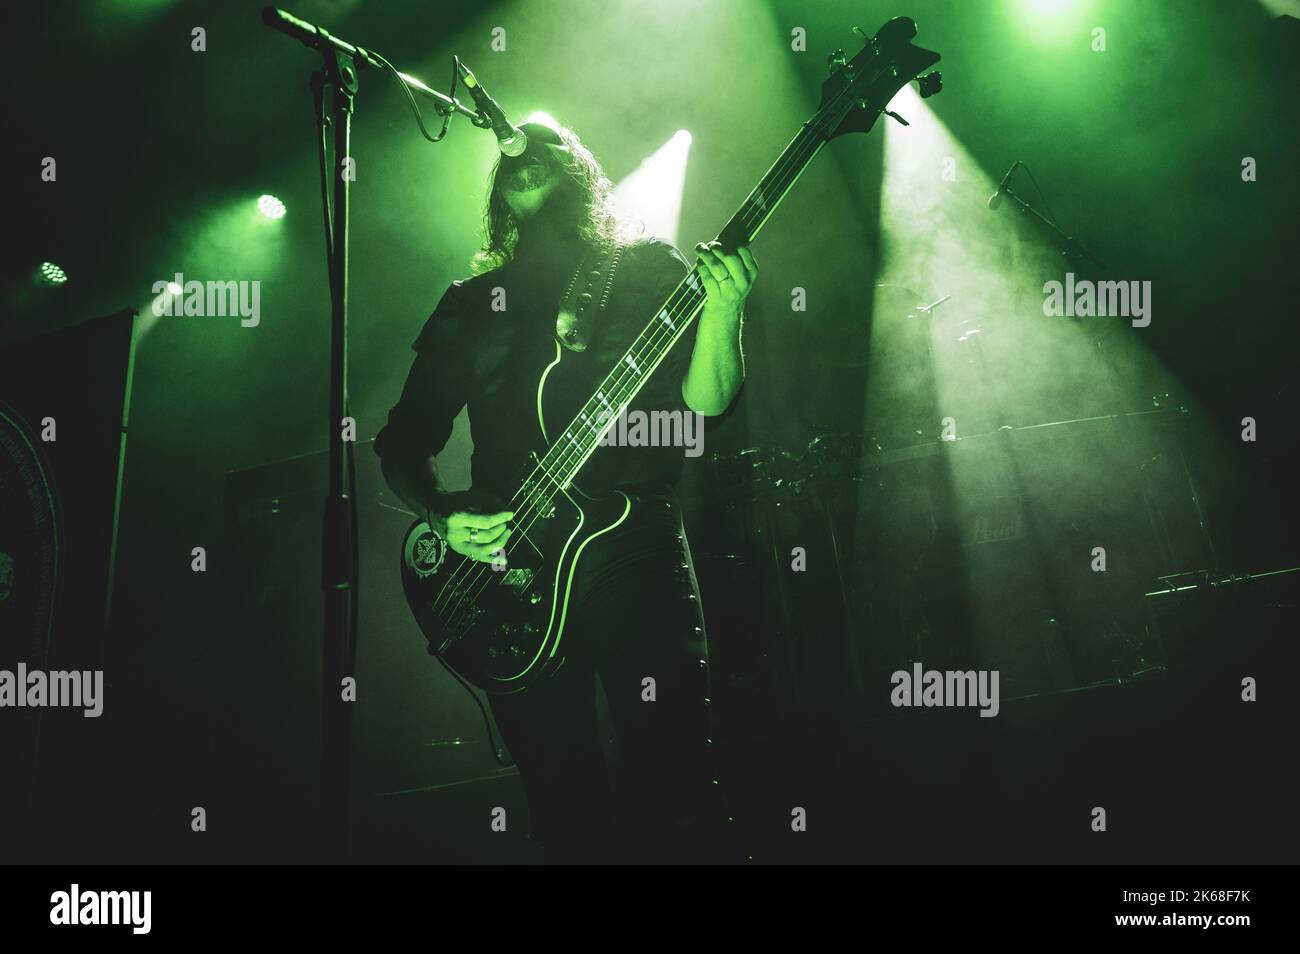 Copenhagen, Denmark. 05th, October 2022. The Swedish death metal band Tribulation performs a live concert at Amager Bio in Copenhagen. Here vocalist and bass player Johannes Andersson is seen live on stage. (Photo credit: Gonzales Photo - Nikolaj Bransholm). Stock Photo